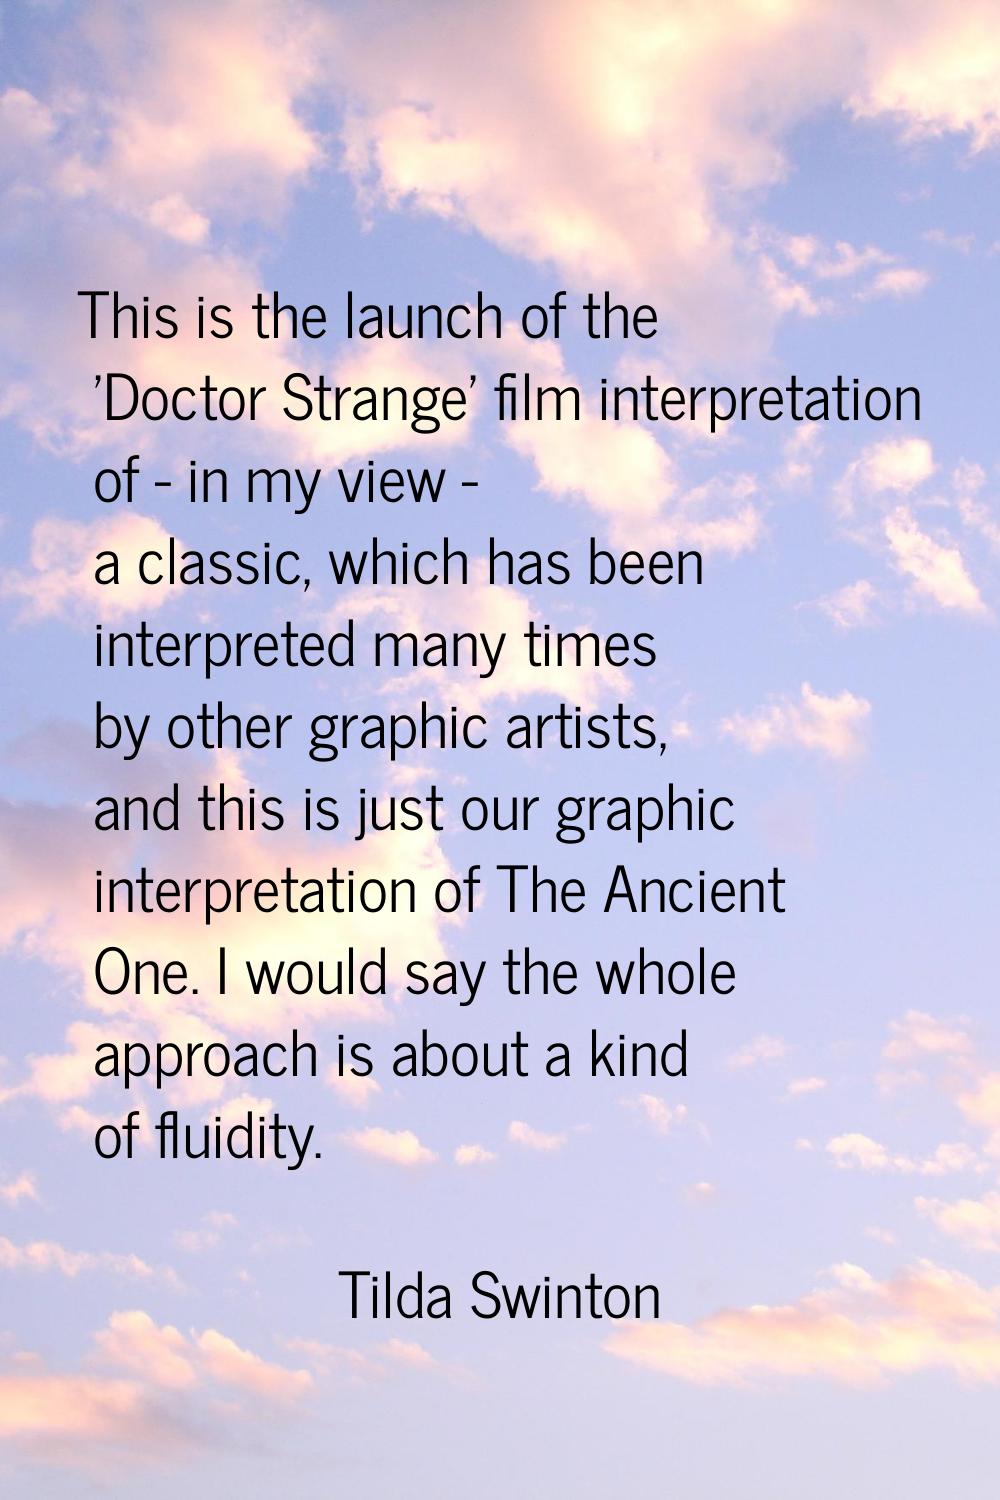 This is the launch of the 'Doctor Strange' film interpretation of - in my view - a classic, which h